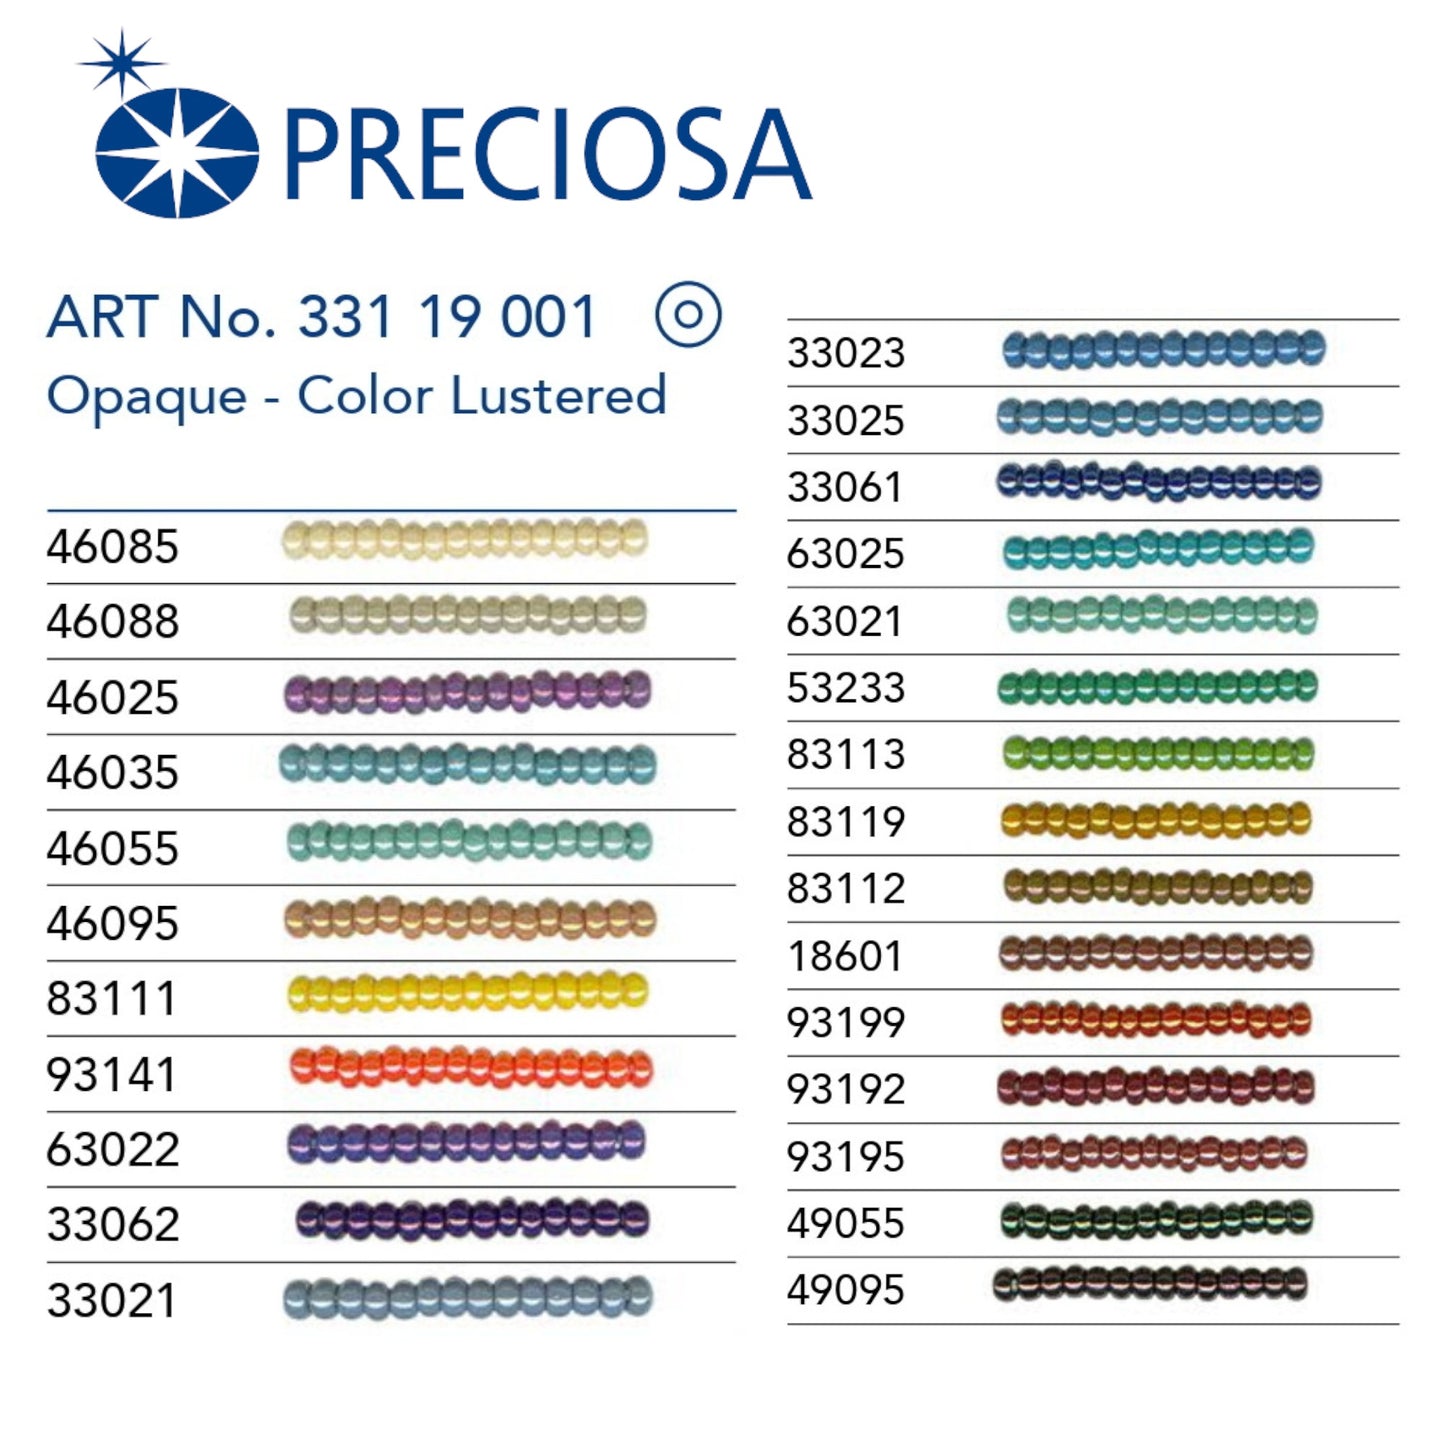 46035 Czech Seed Beads Preciosa Rocailes Opaque - Color Lustered - VadymShop